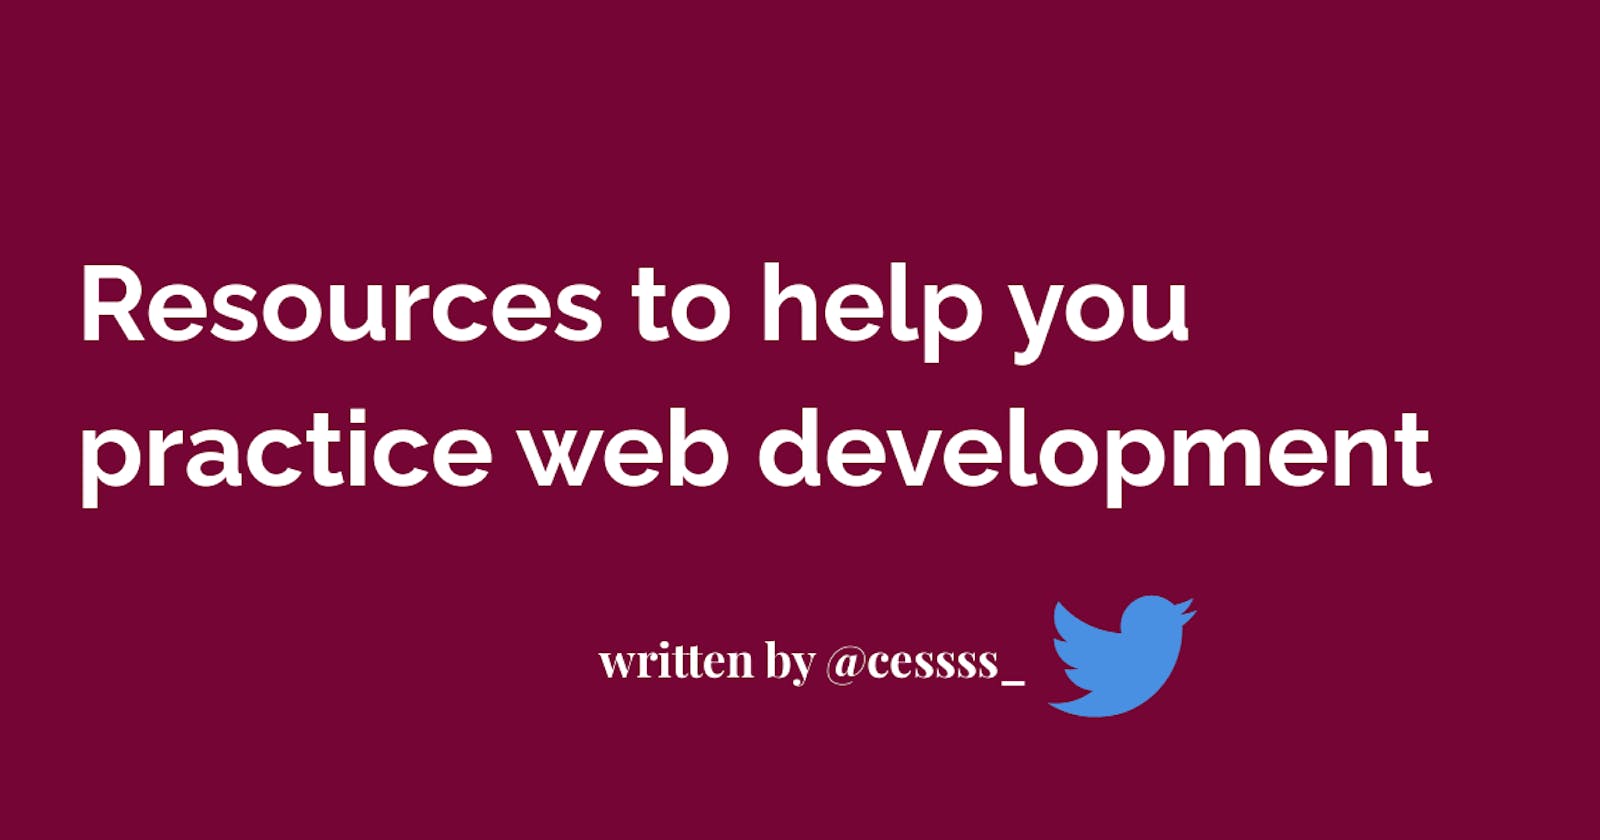 Resources to help you practice web development